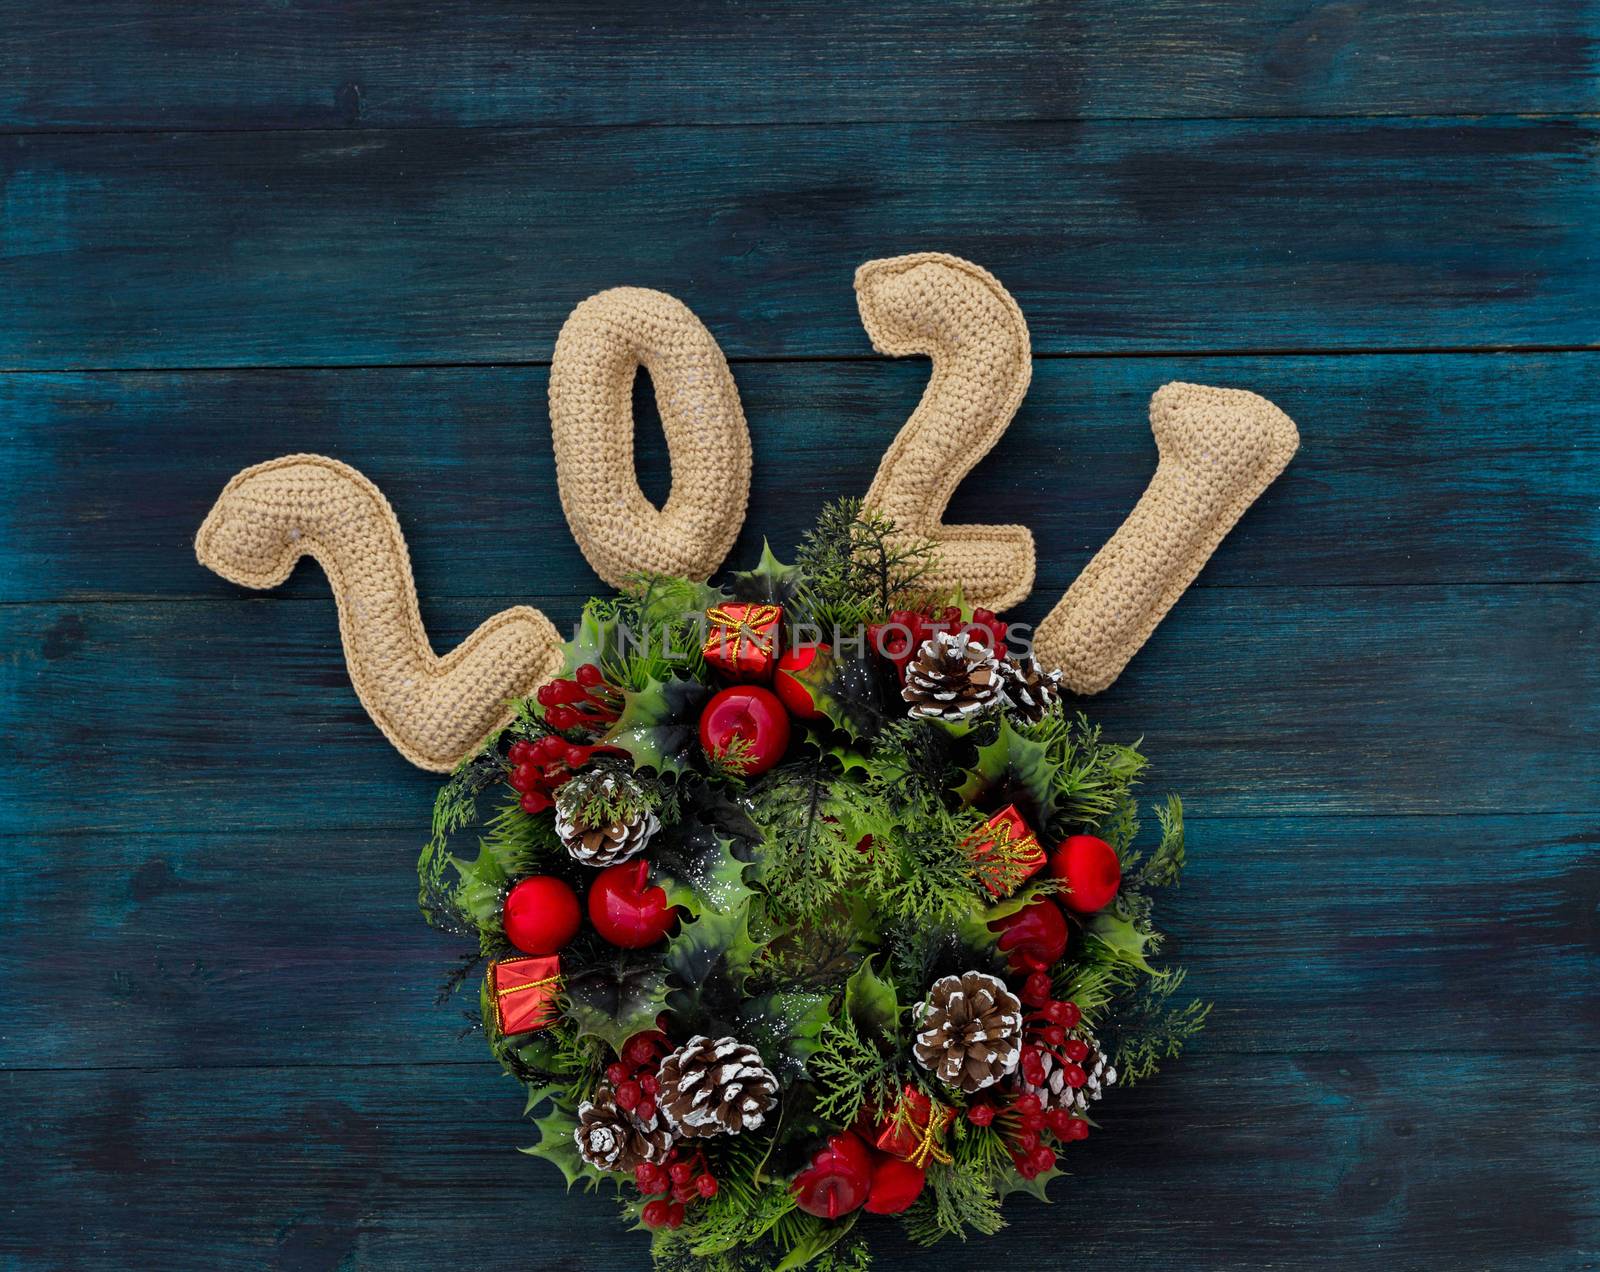 .Christmas background with knitted numbers 2021 and decorative wreath